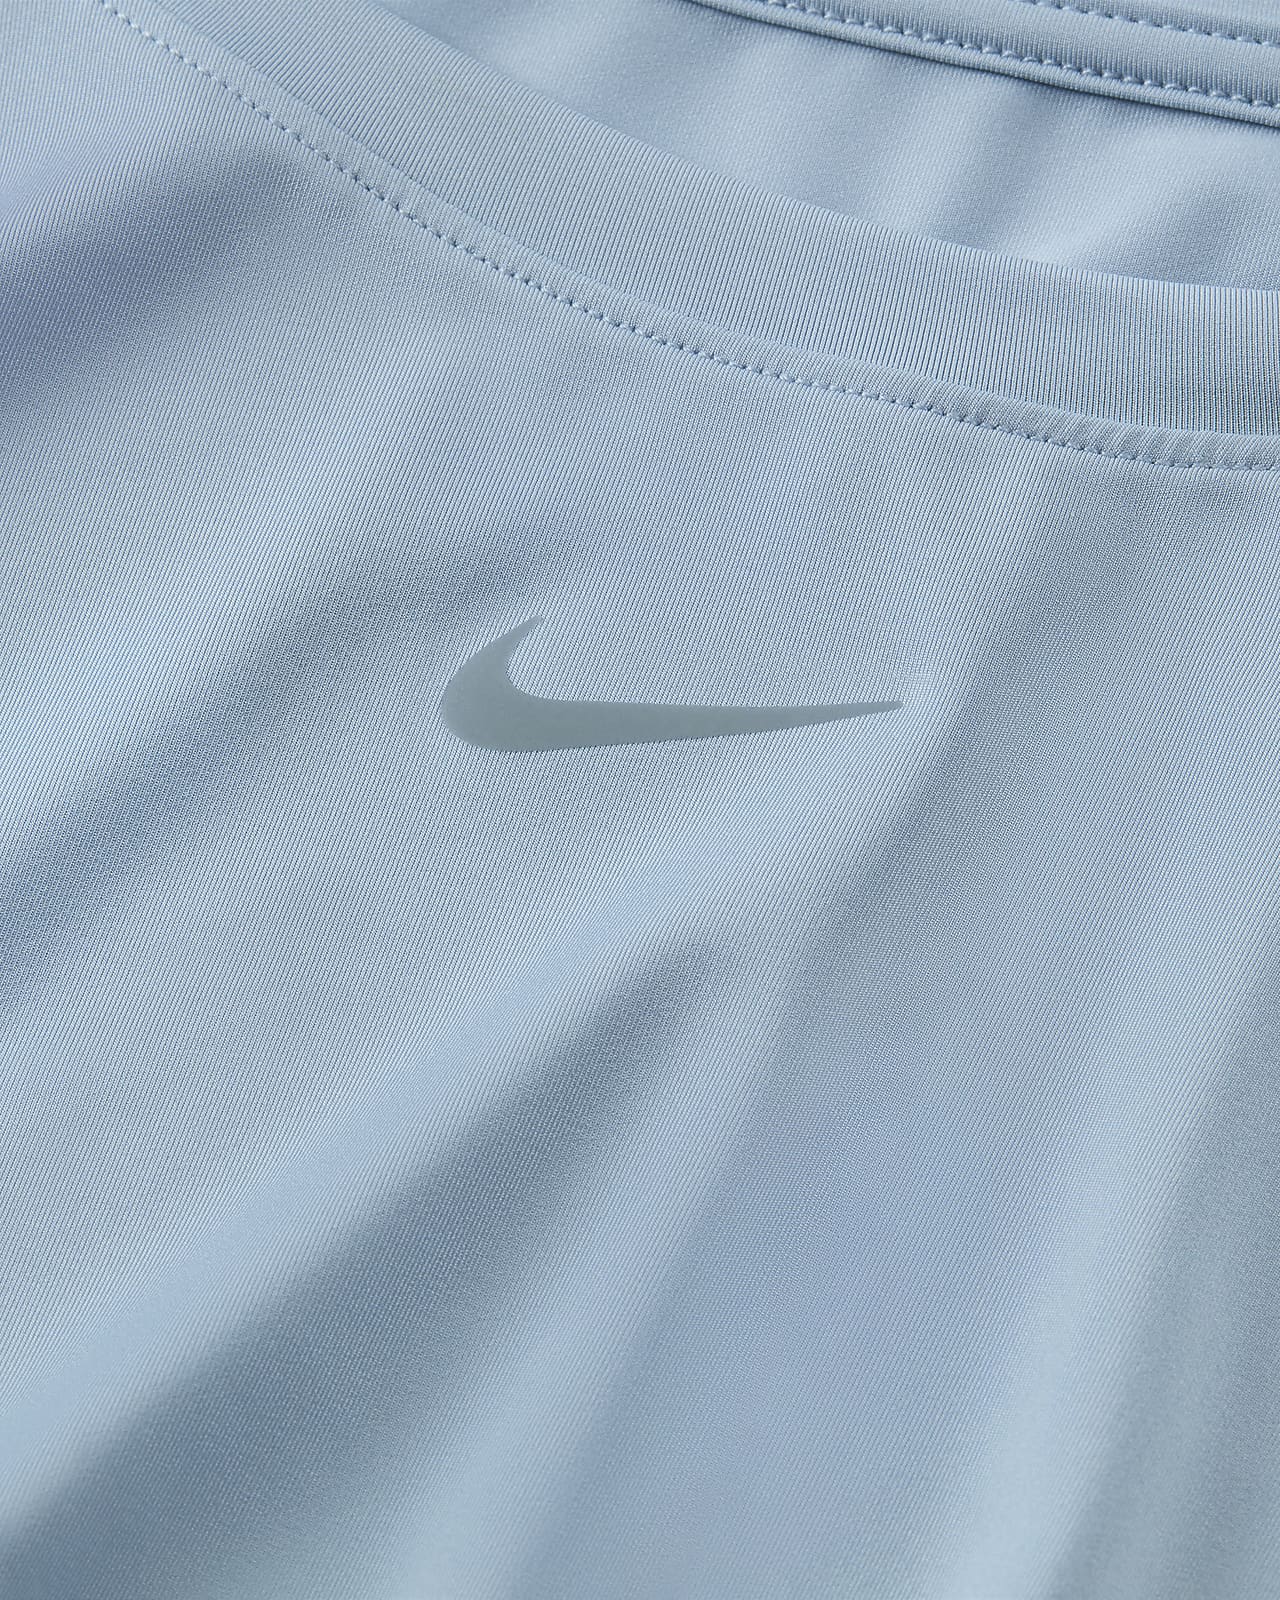 Embroidered Womens Nike One Luxe Dri-FIT Long Sleeve Standard Fit